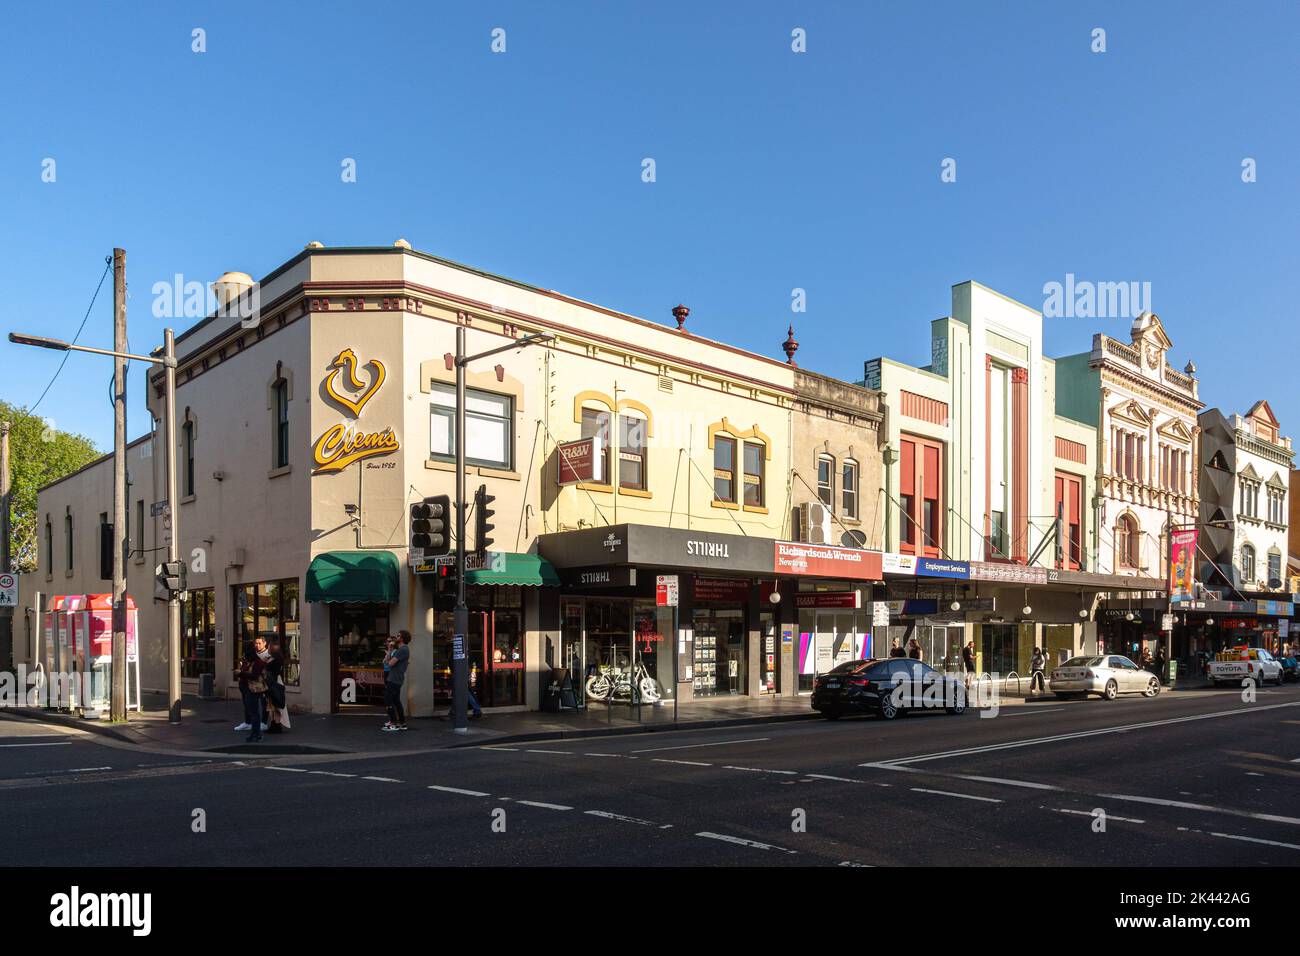 Buildings along North King Street in Newtown, Sydney, famous for its Victorian and Federation era architecture Stock Photo